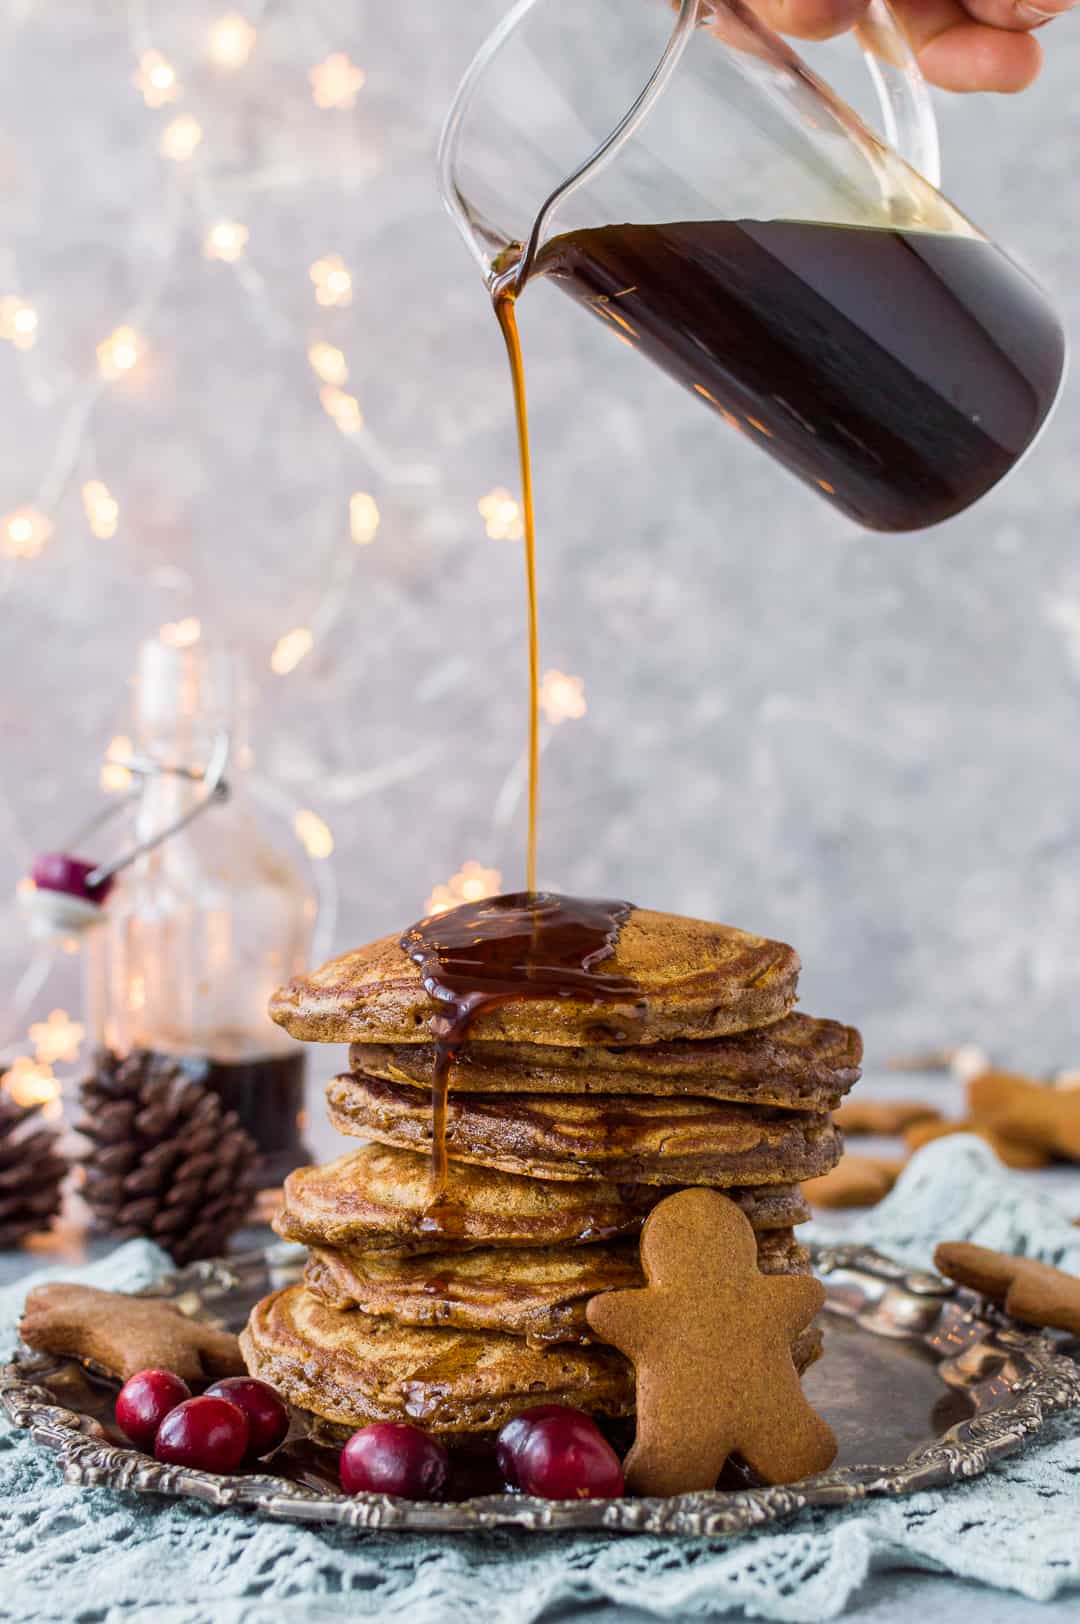 Gingerbread pancakes with gingerbread syrup – soft, fluffy gingerbread flavoured pancakes topped with gingerbread syrup, the perfect festive breakfast!